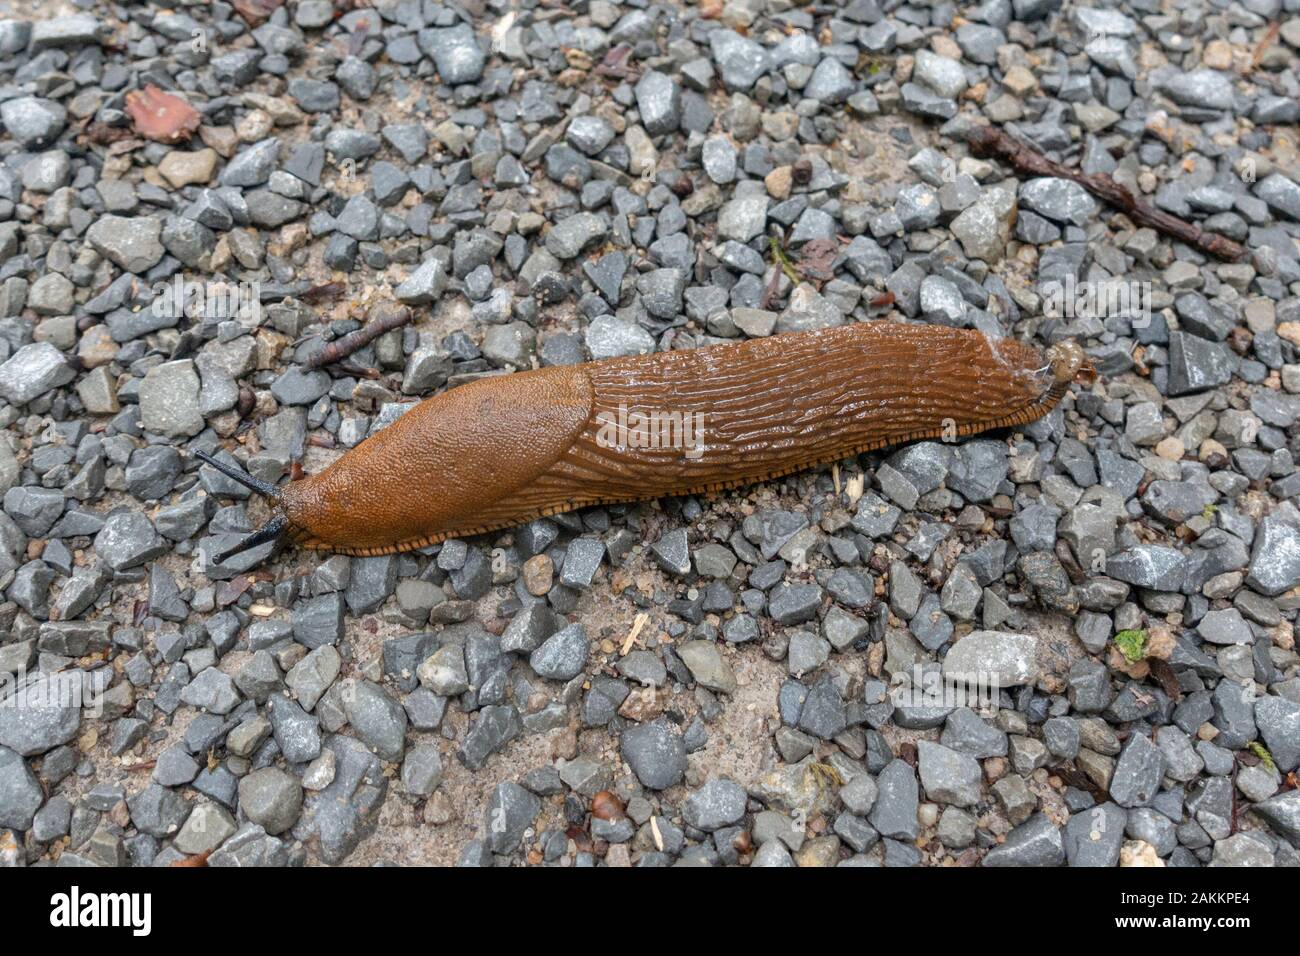 A red slug, also called chocolate arion or the European red slug, Arion rufus. Stock Photo